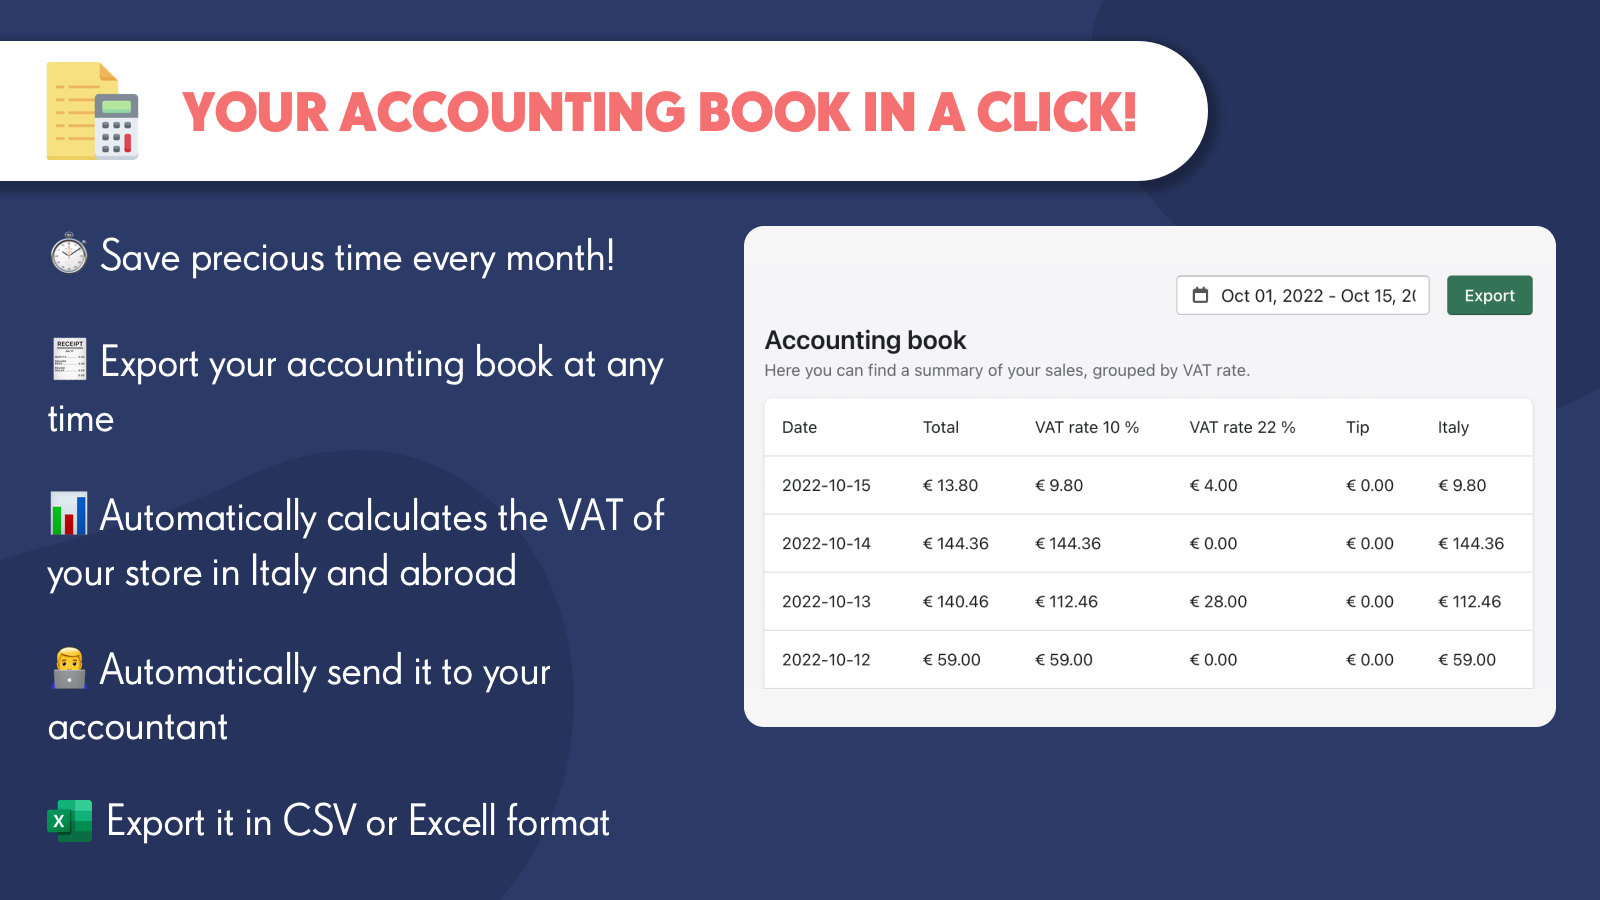 Accounting book info